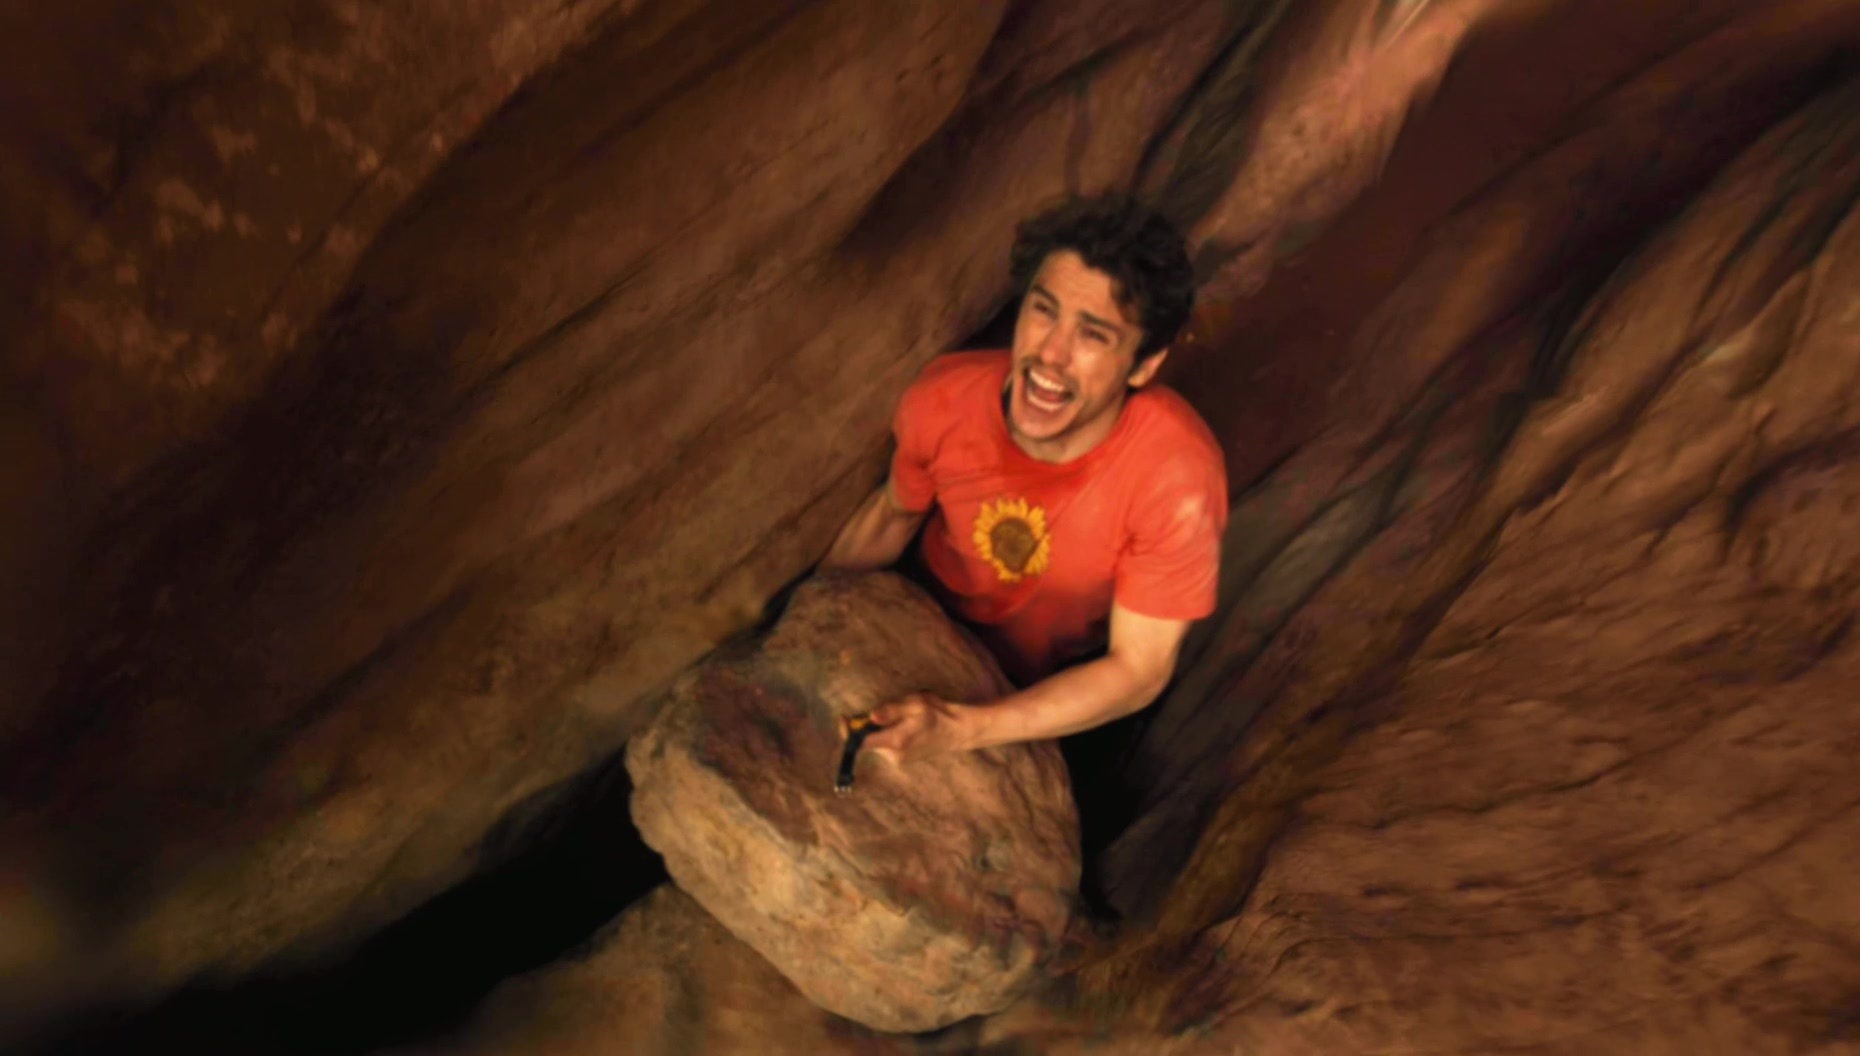 127 Hours #2